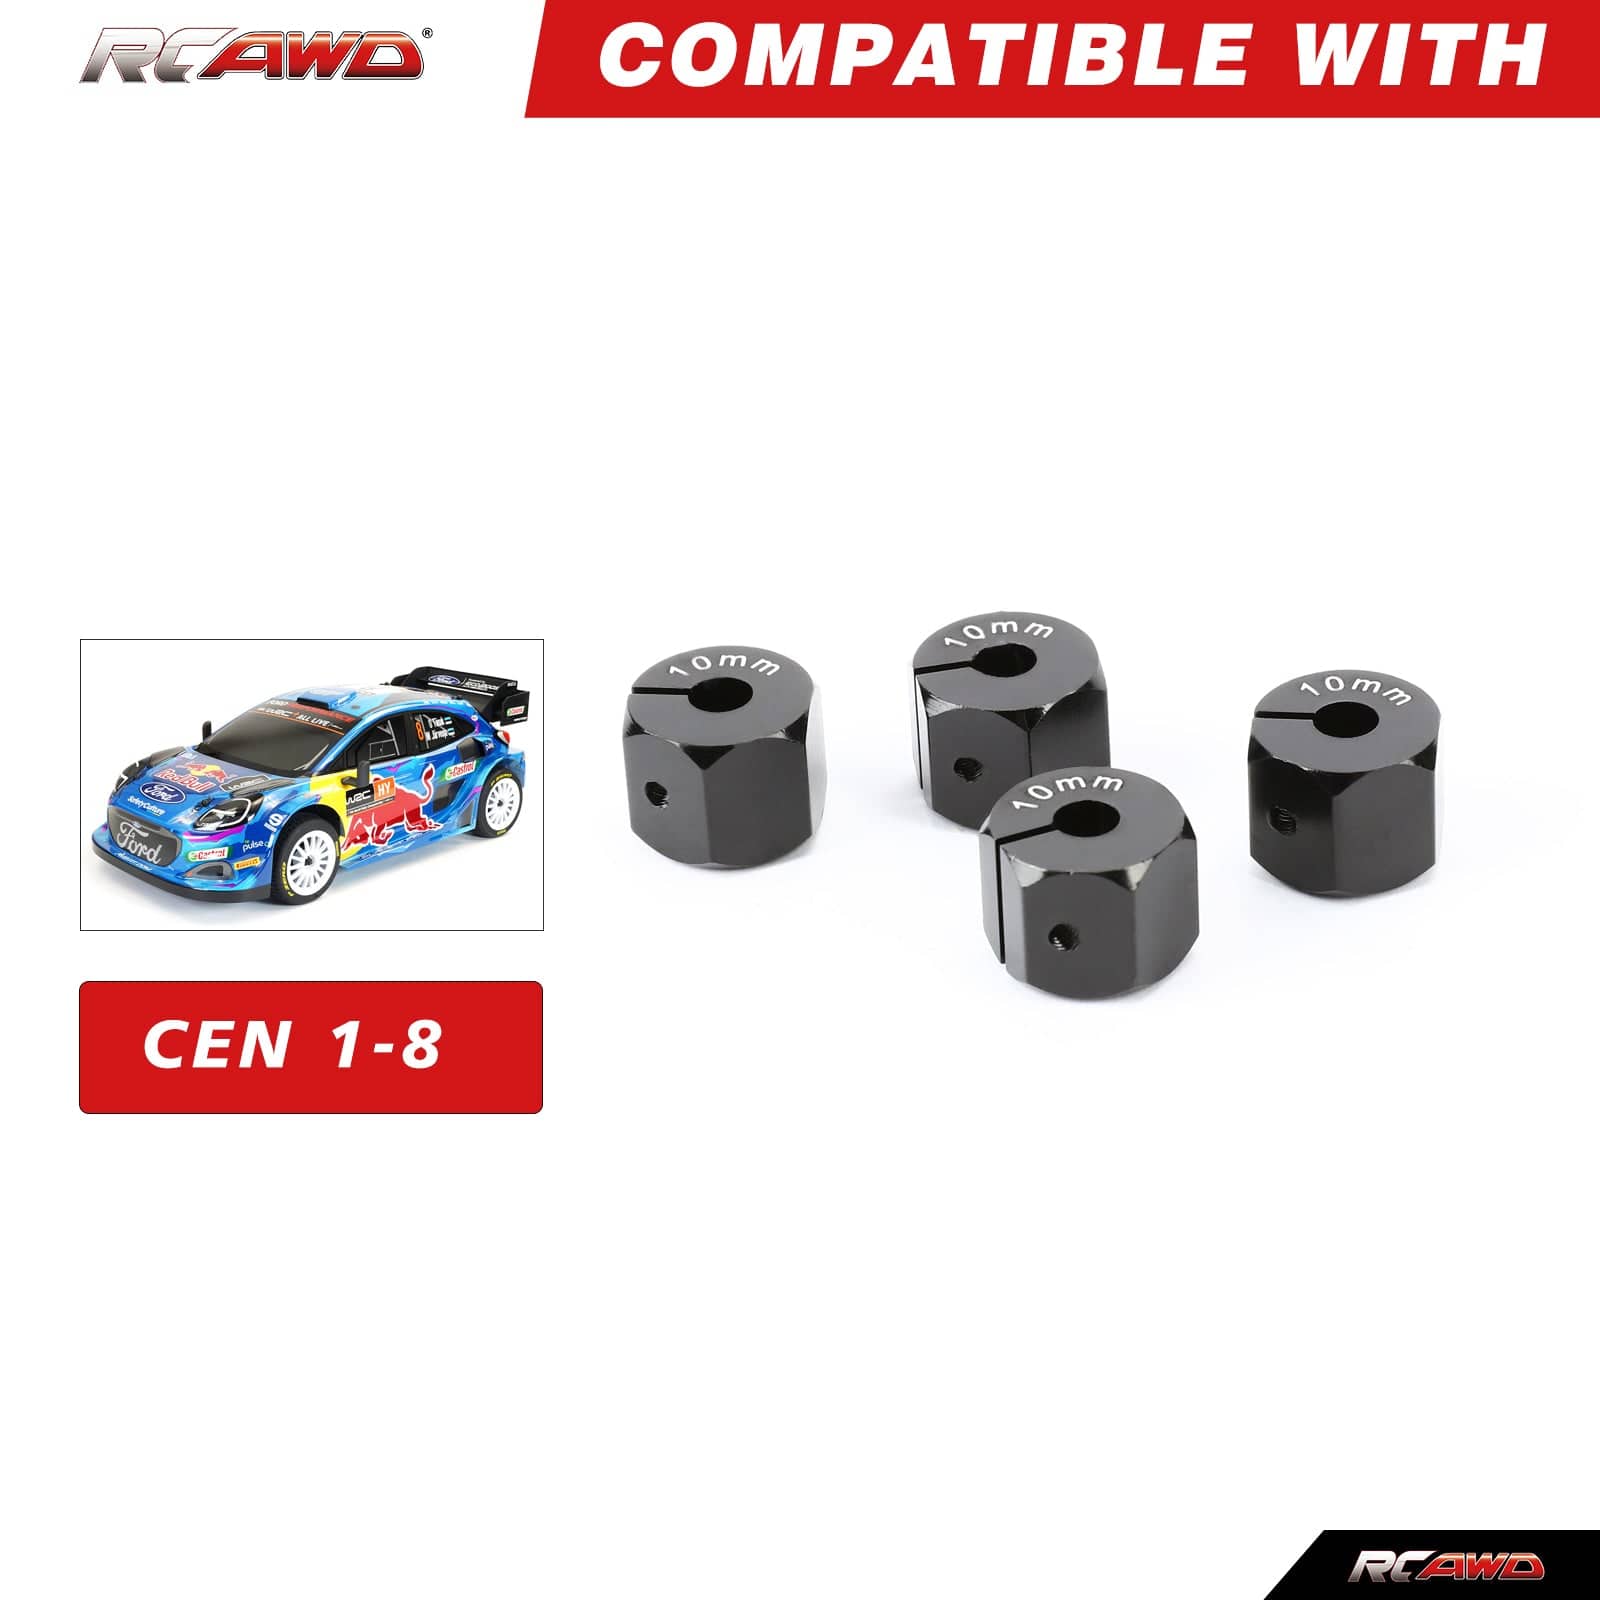 RCAWD RCAWD 1/8 CEN Racing Upgrades Alloy 12MM Wheel Hex